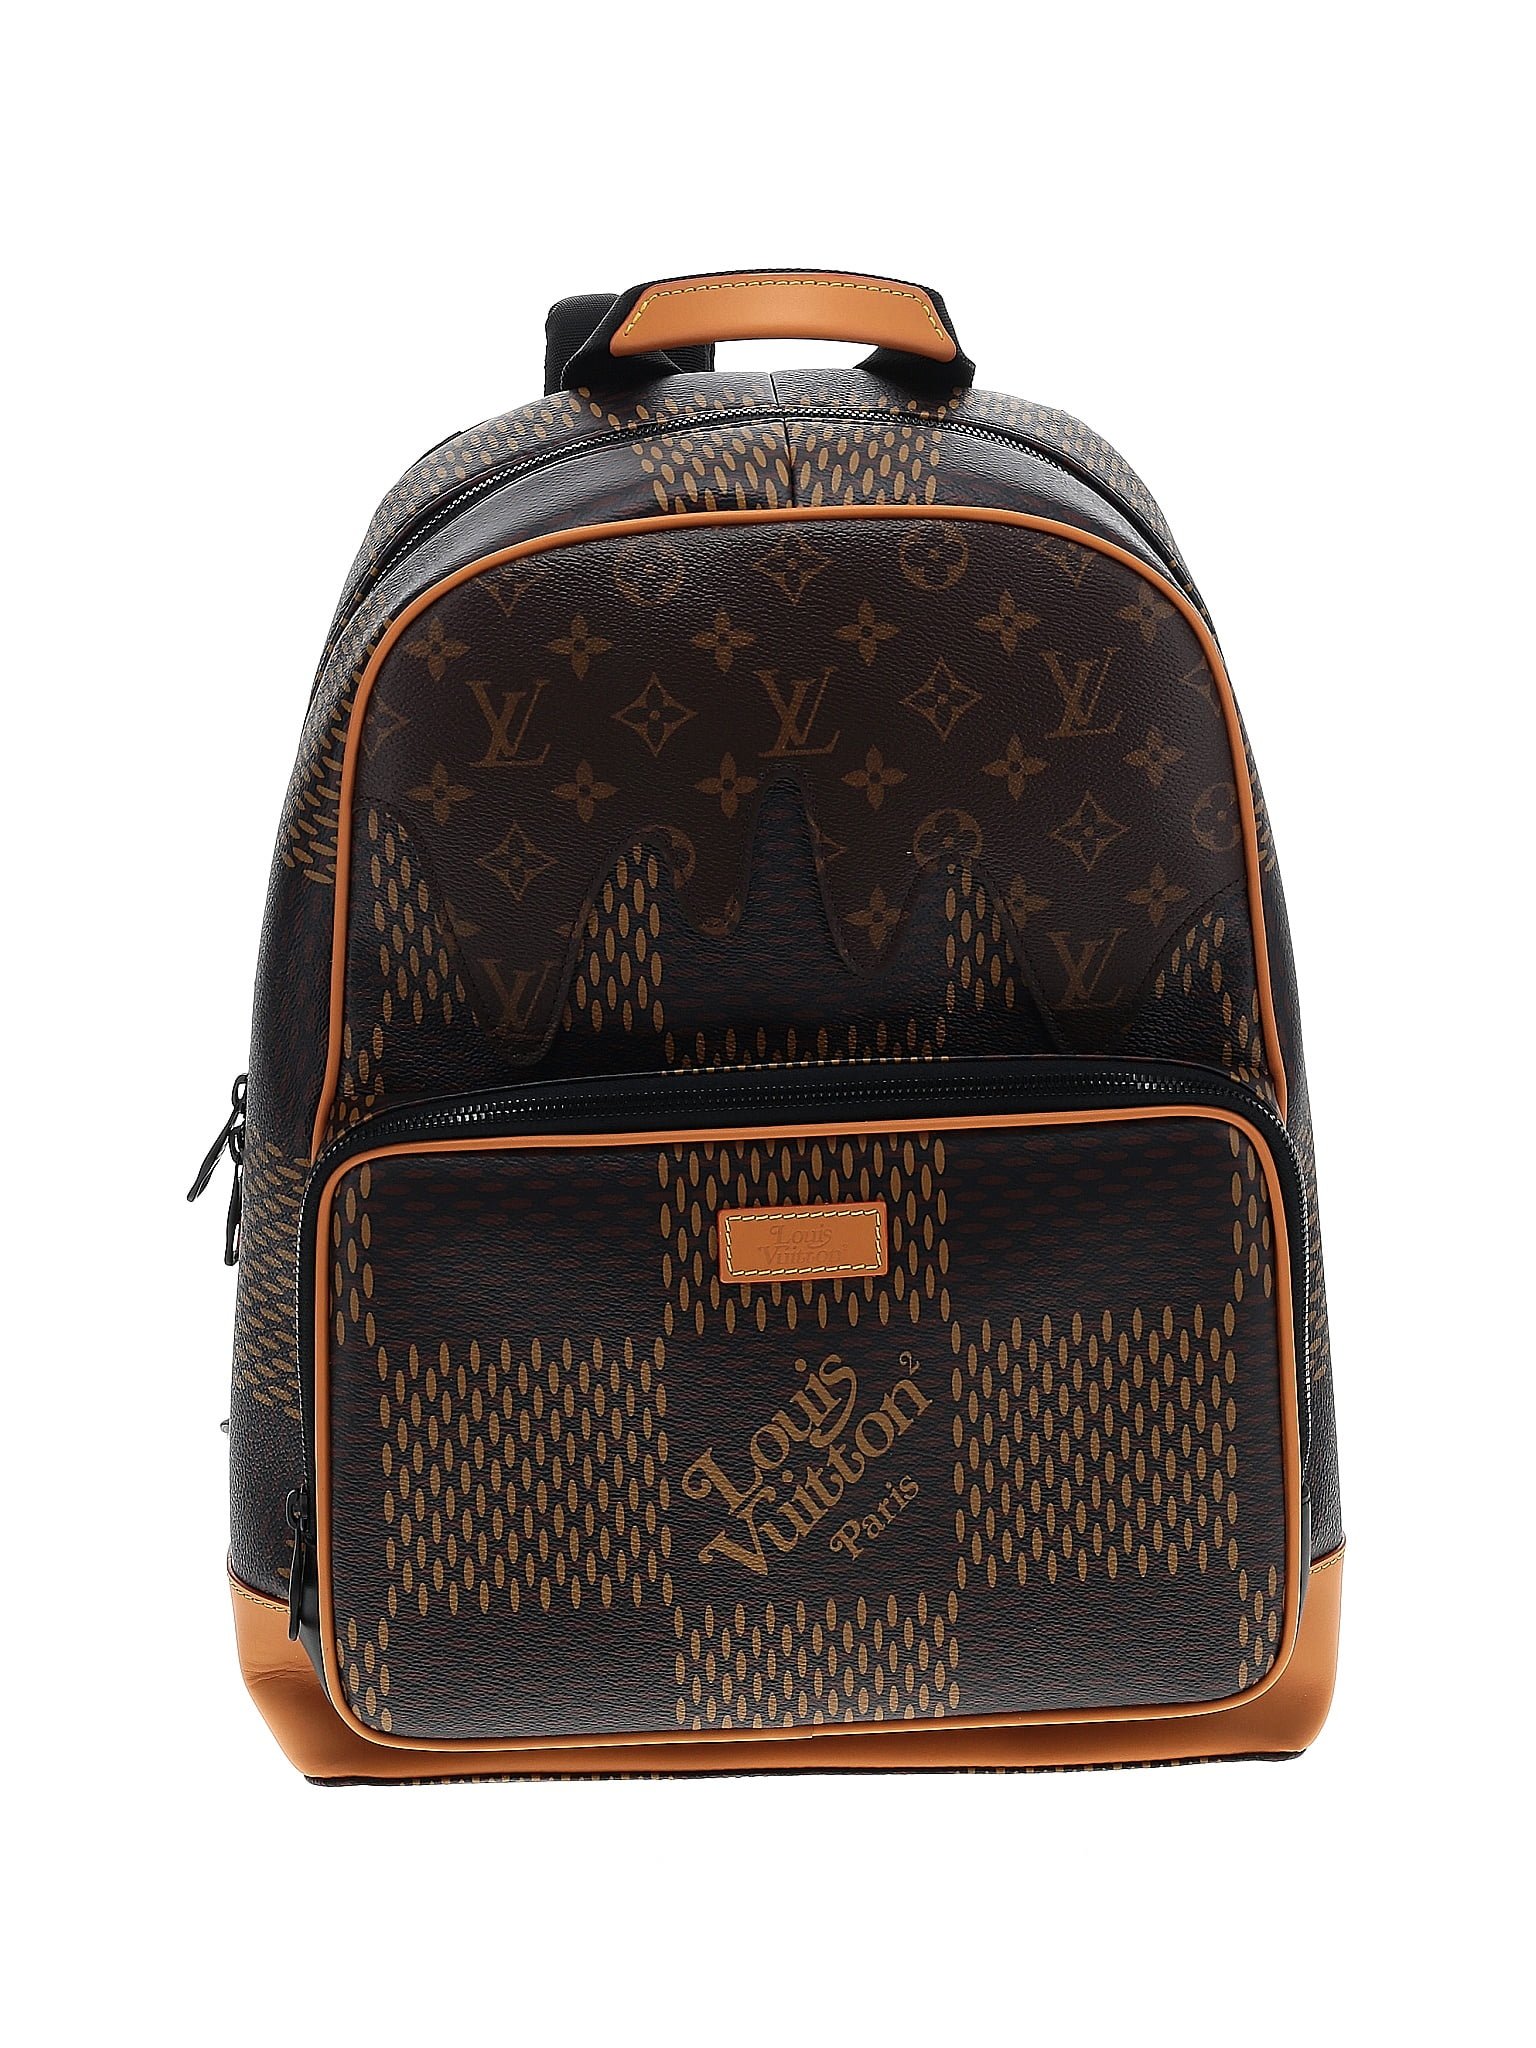 Louis Vuitton 100% Coated Canvas Brown Ltd. Ed. Virgil Abloh Nigo Campus  Backpack One Size - 48% off